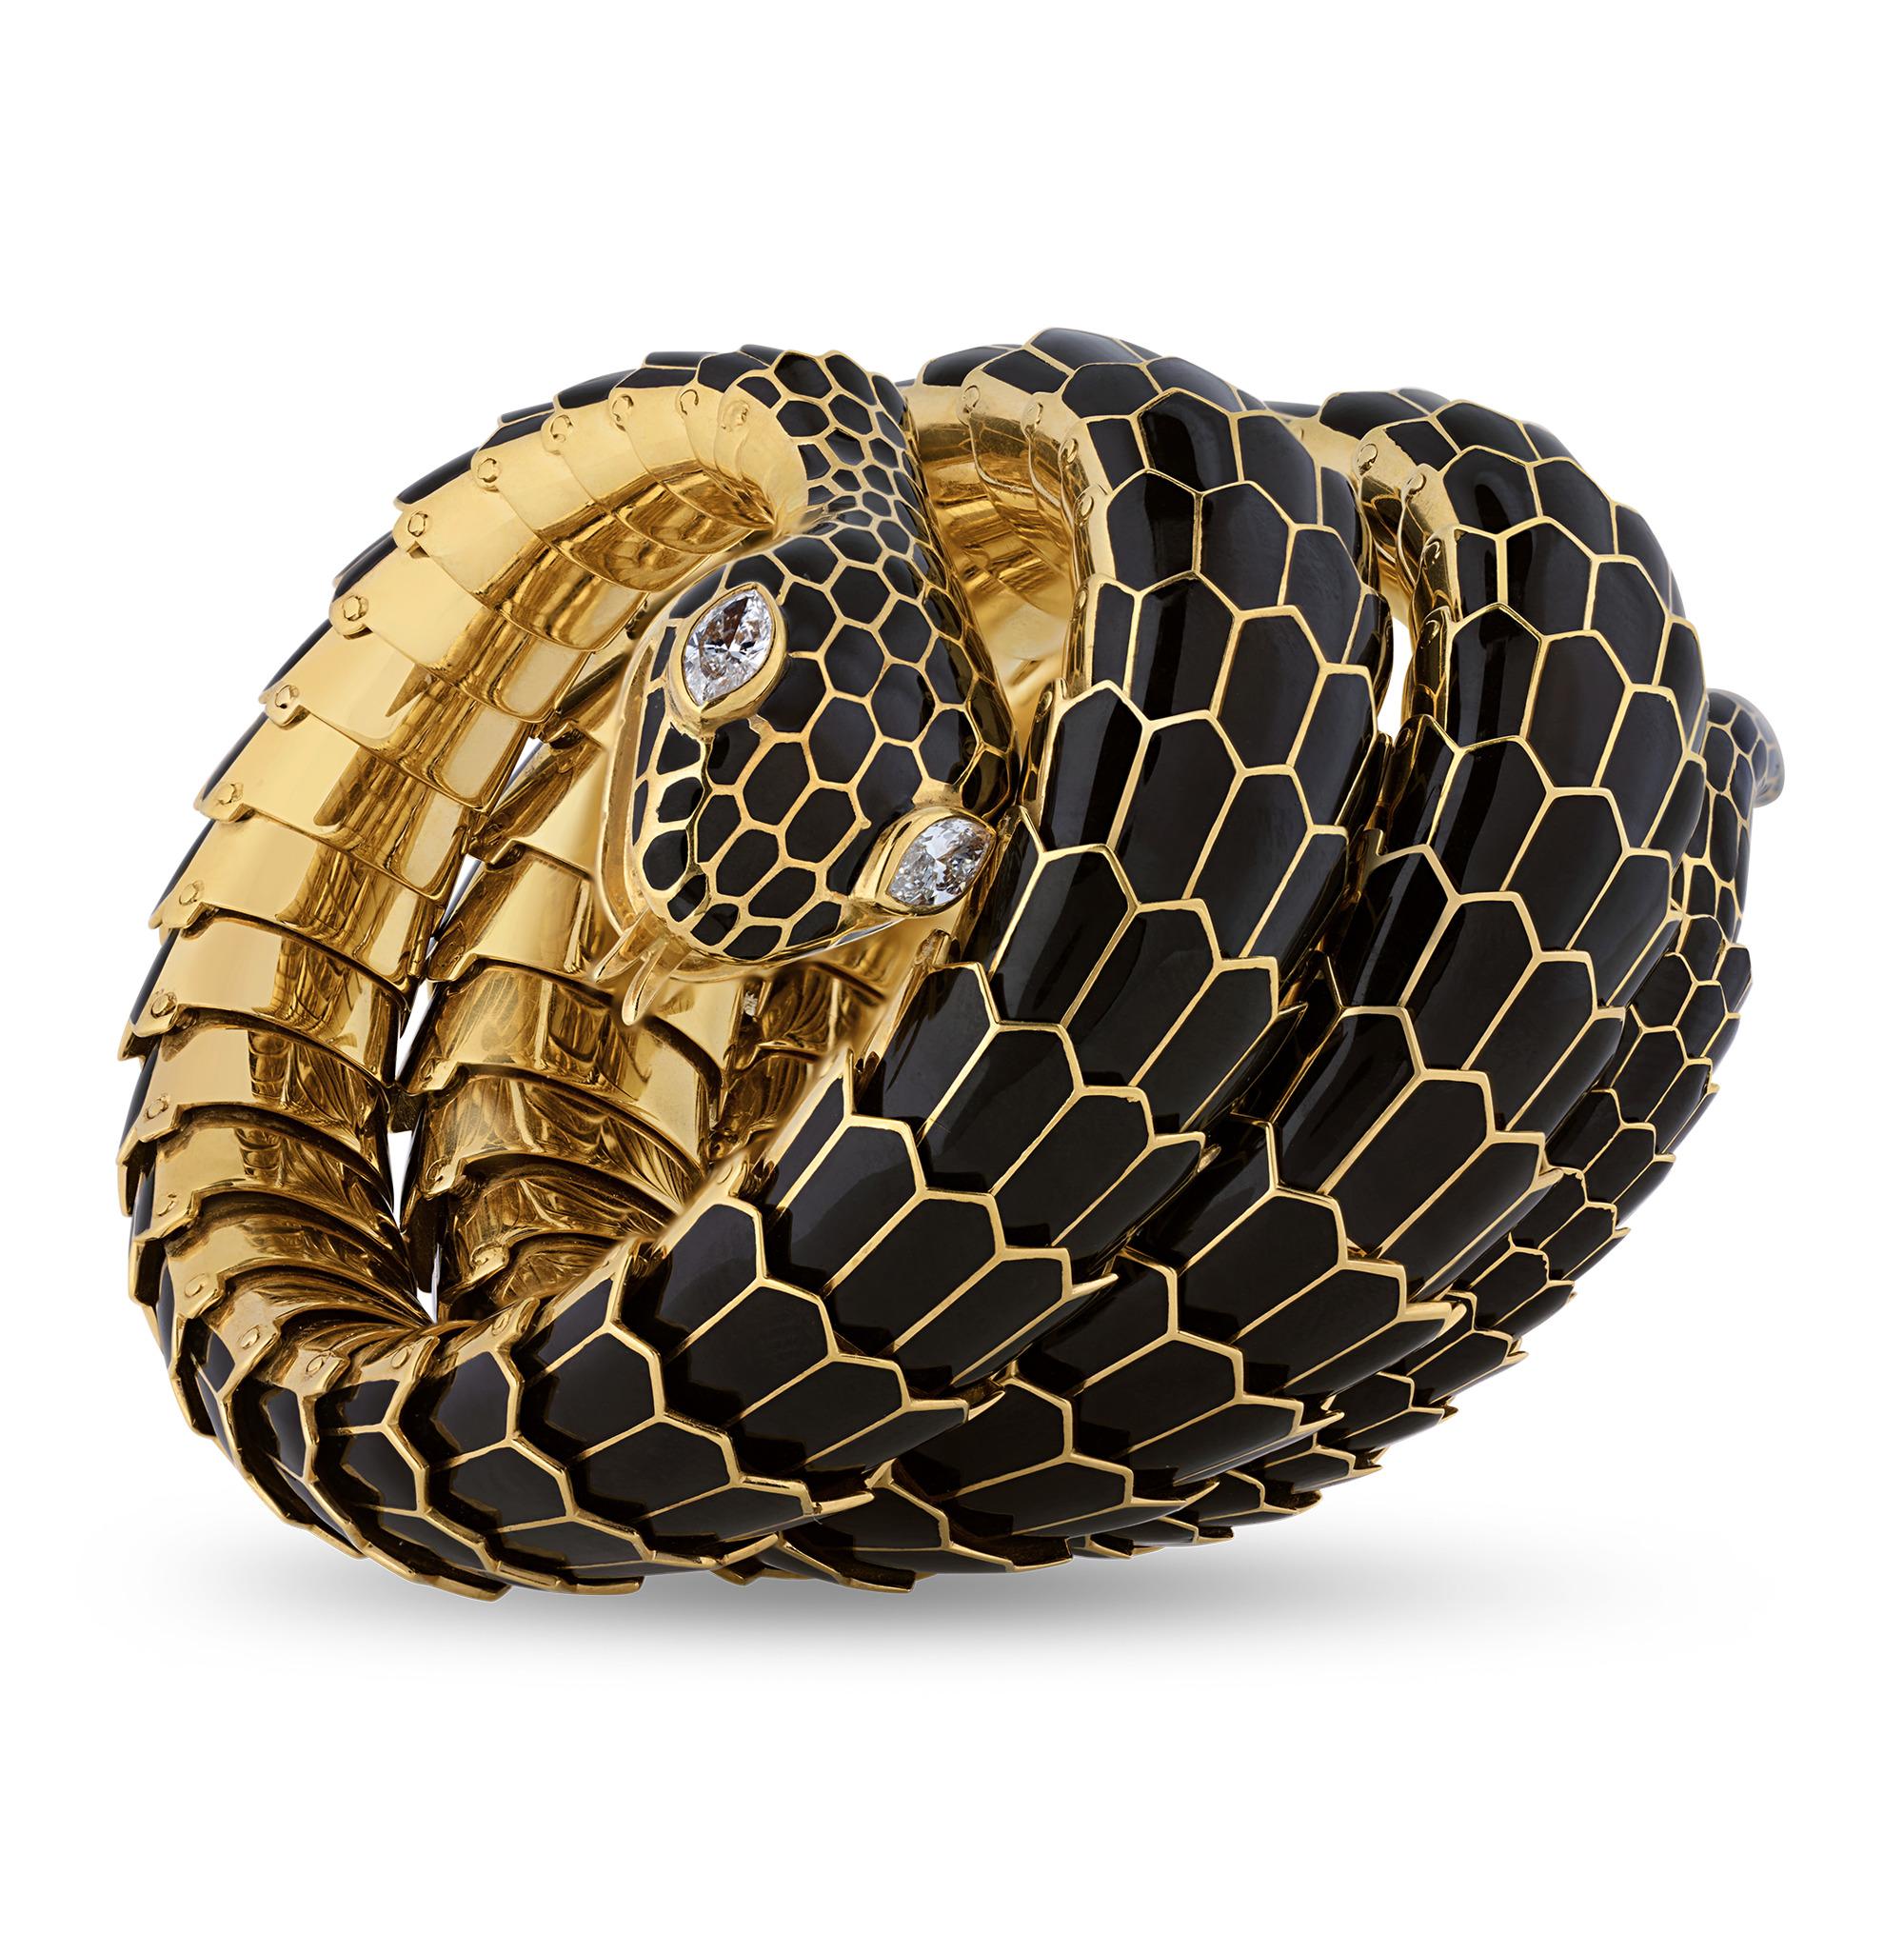 This eye-catching vintage bangle takes the form of a slithering snake. The handcrafted gold and black enamel bracelet perfectly simulates the scaly skin of the captivating reptile, and the serpent's eyes are formed of glittering marquise-cut white